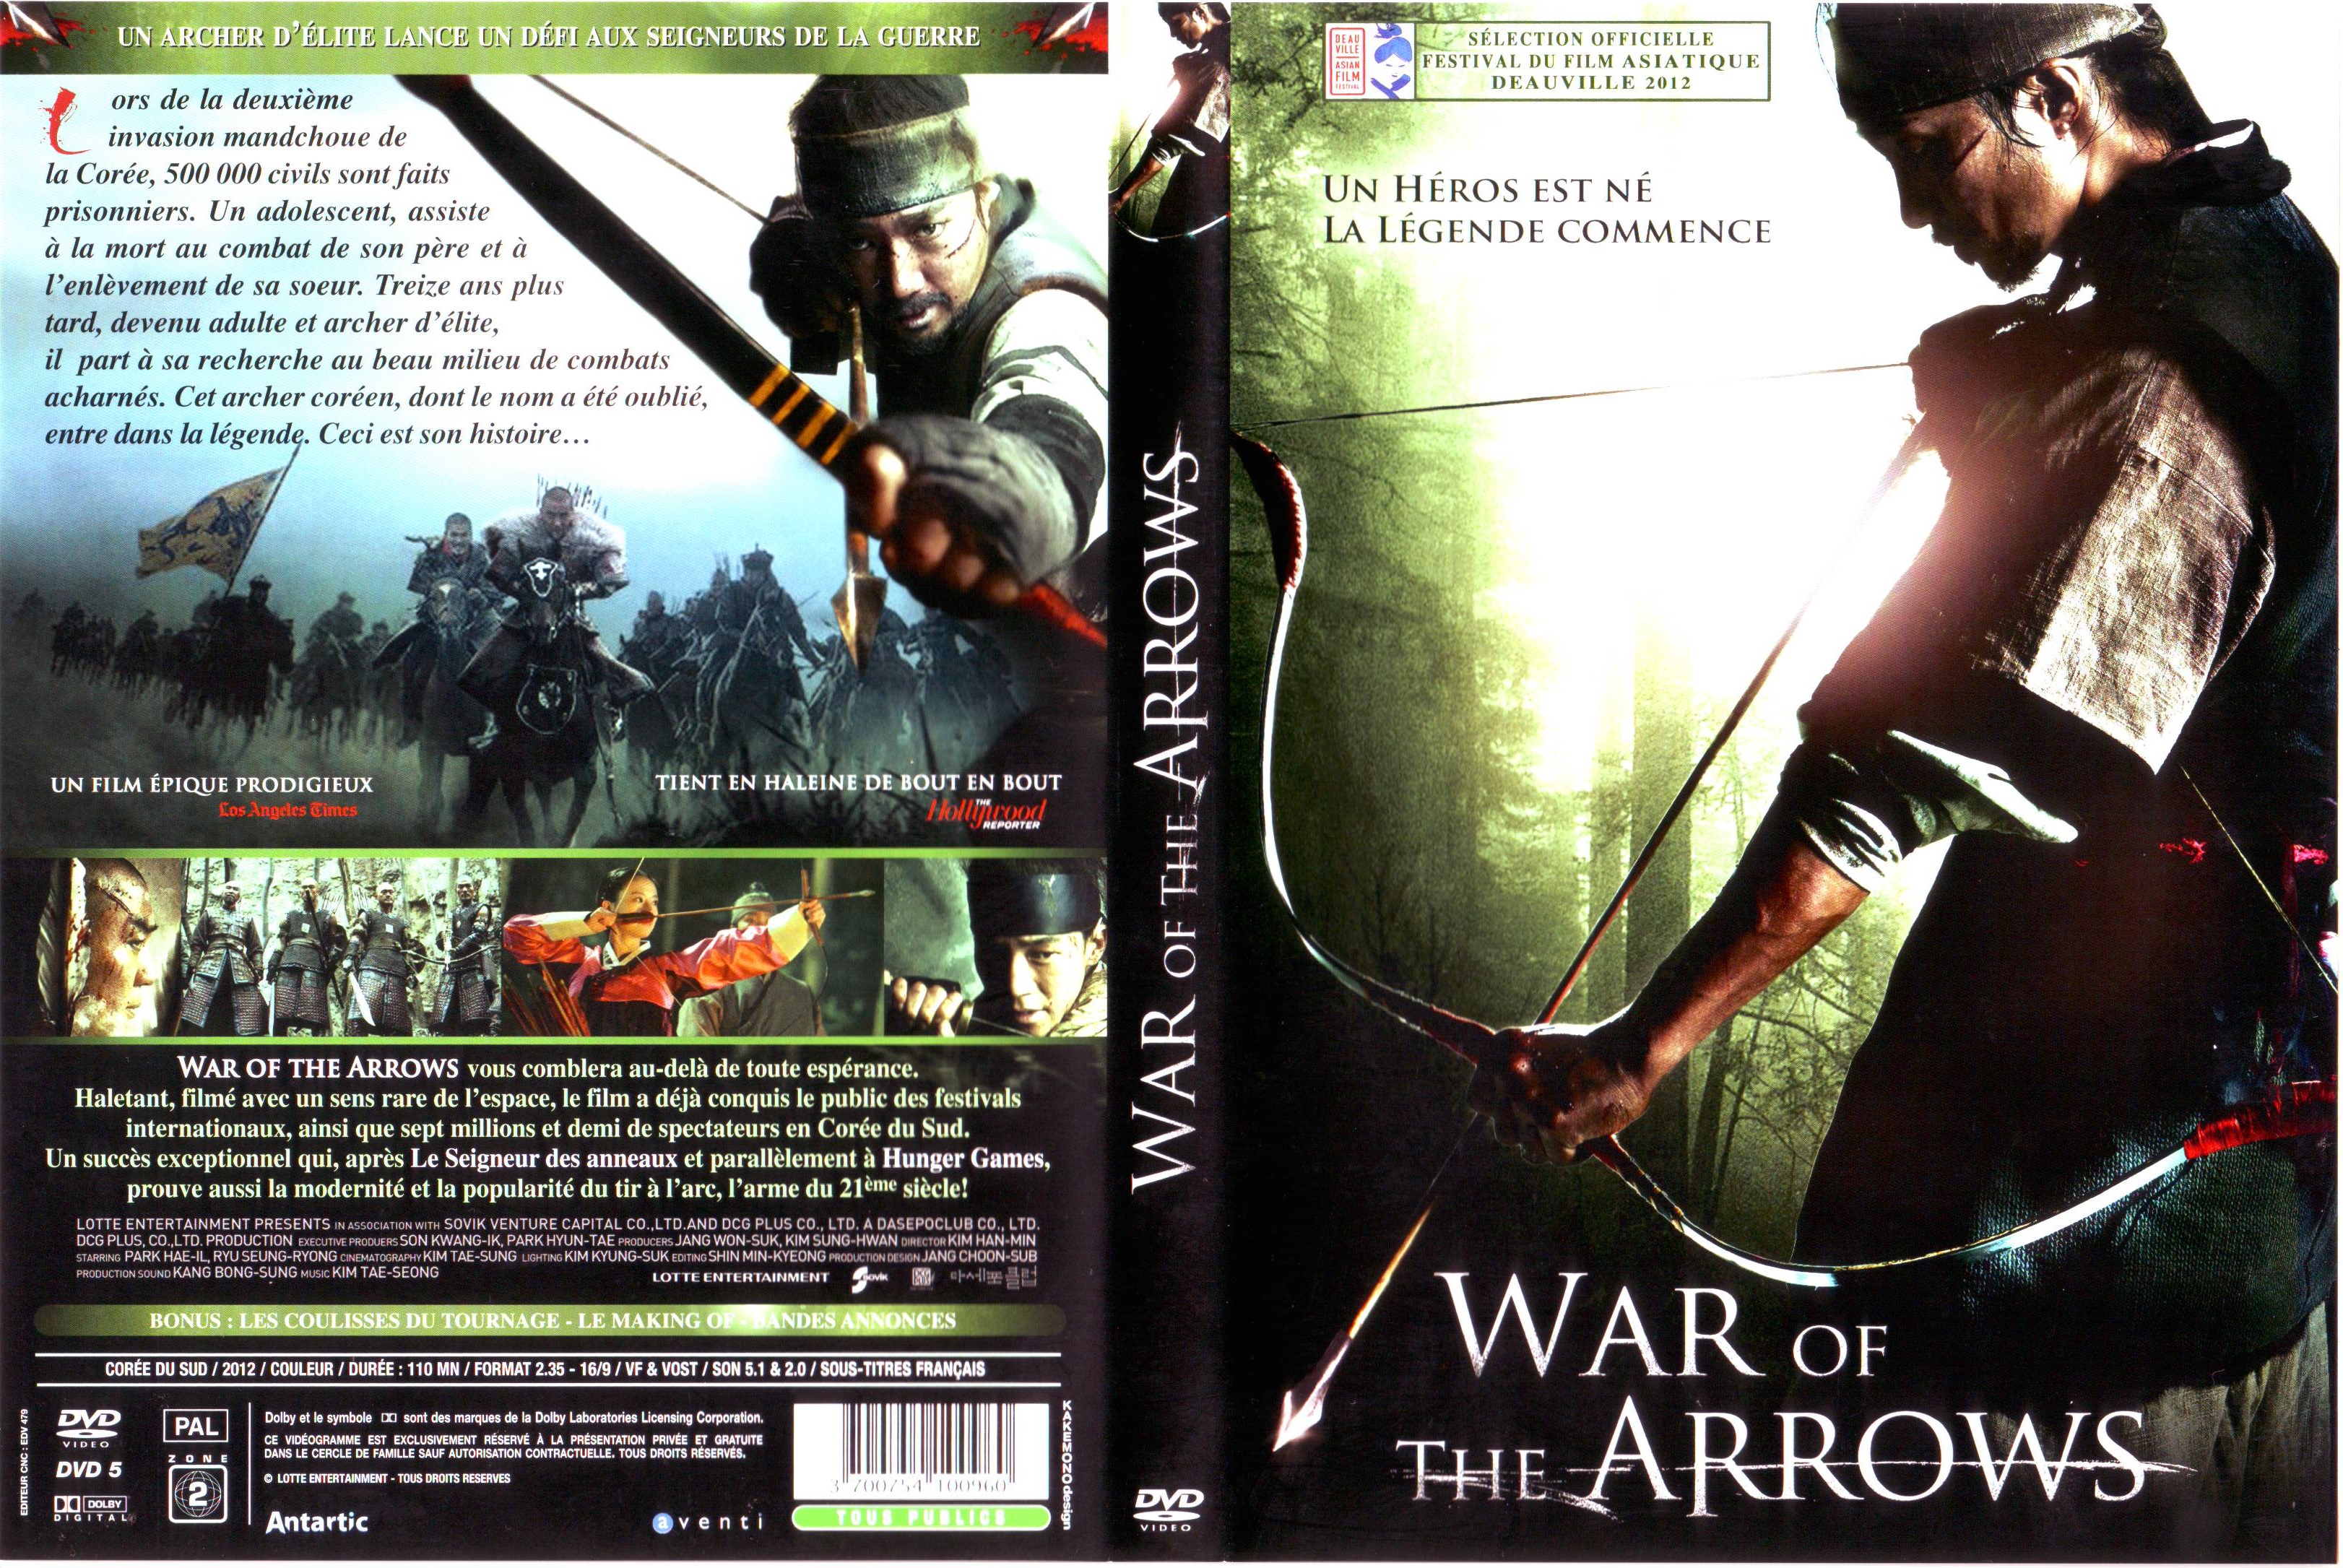 Jaquette DVD War of the arrows